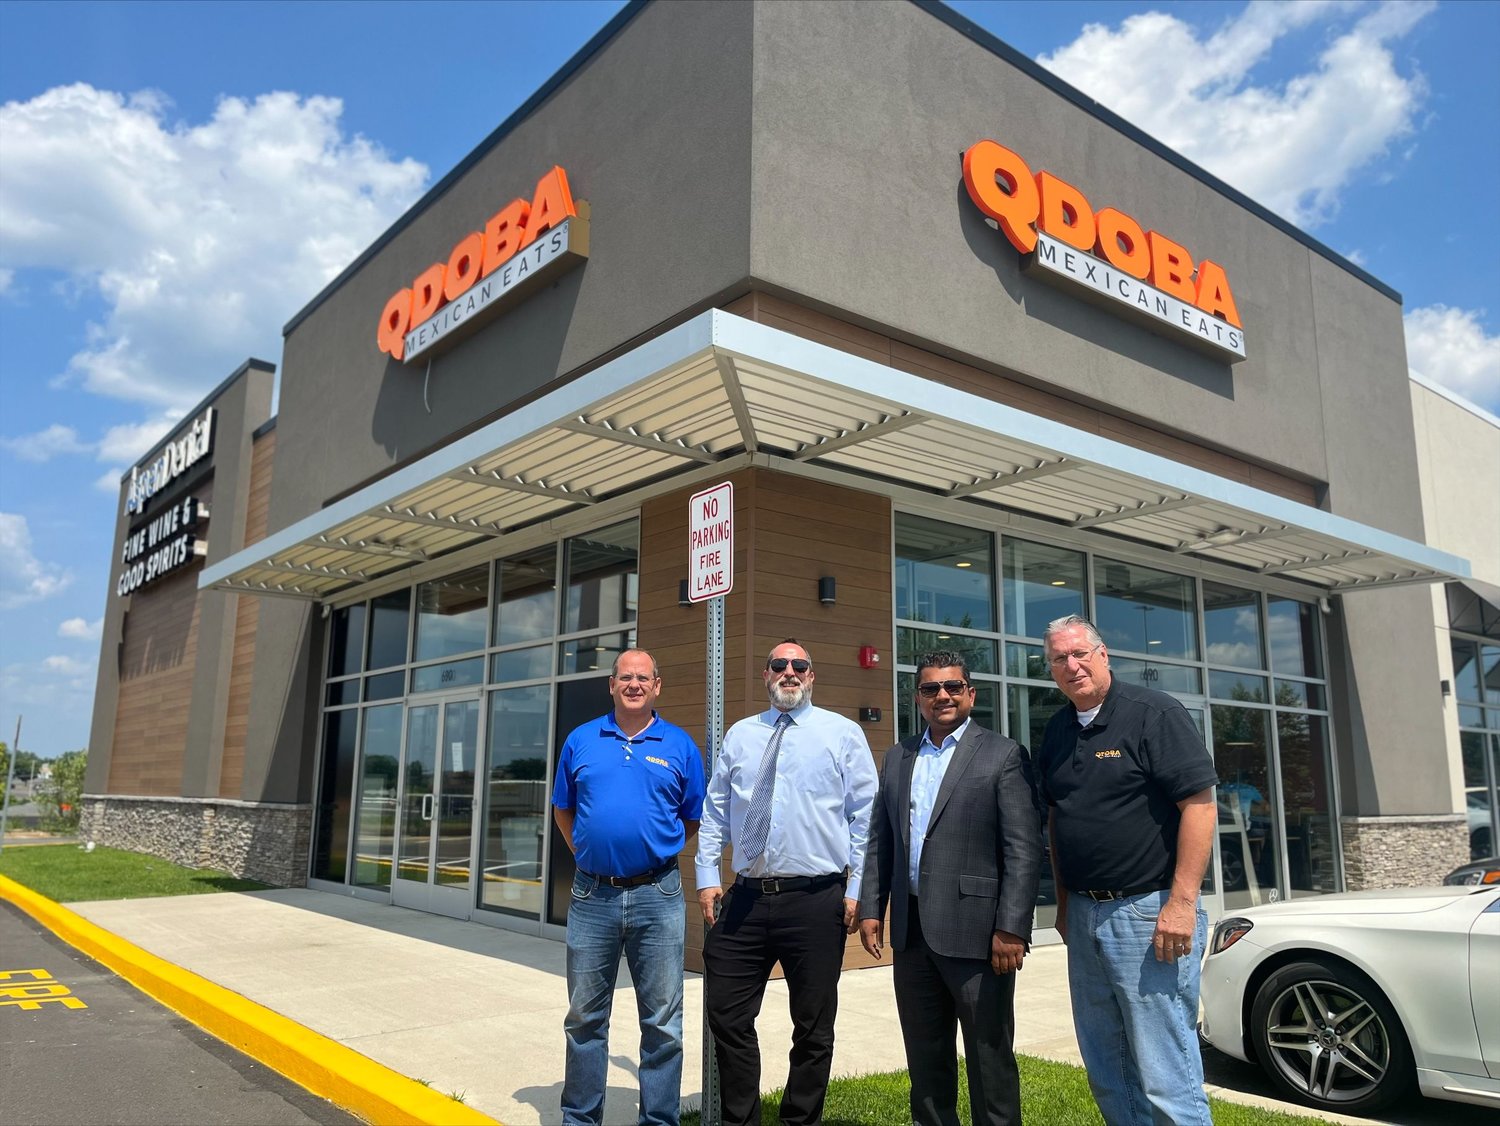 From left, TIG Corp. leaders Rick Sanseverino, Shane Lenahan, Jiger Patel, and Kevin McWilliams cut the ribbon on their latest QDOBA Mexican Eats Restaurant Monday July 25, in Bucks County.